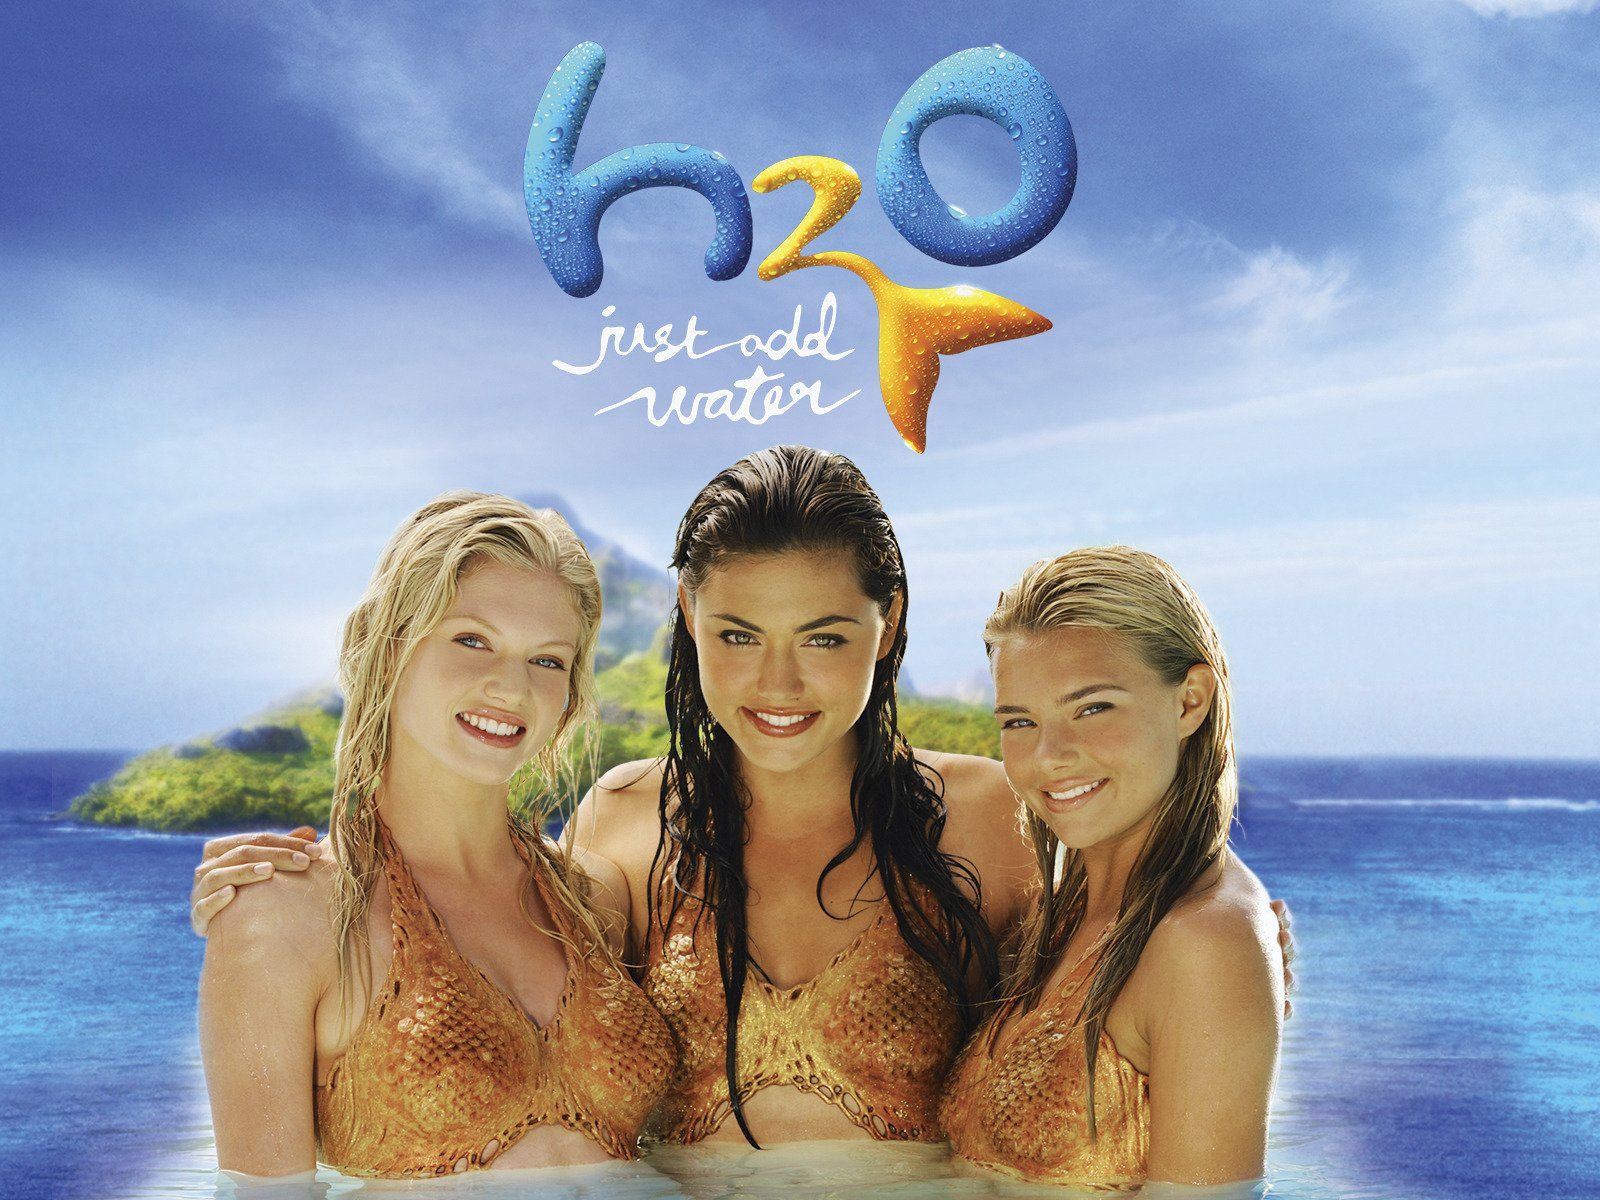 Watch H2O: Just Add Water